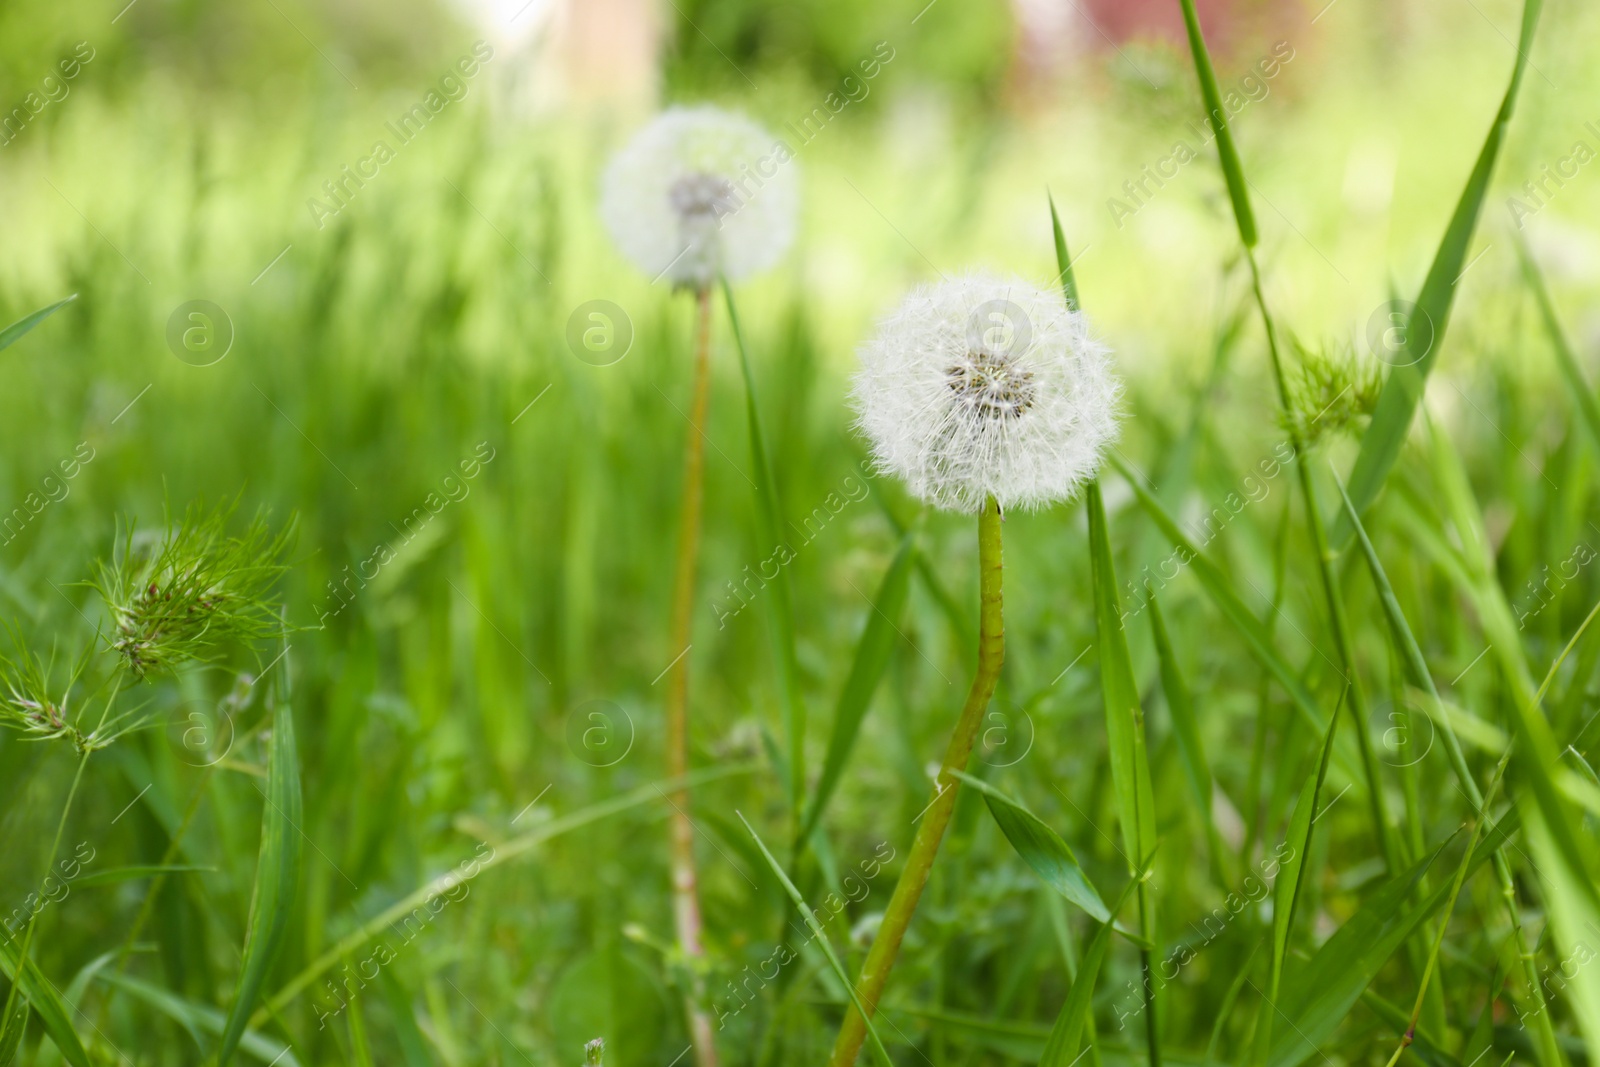 Photo of Closeup view of dandelion on green meadow, space for text. Allergy trigger